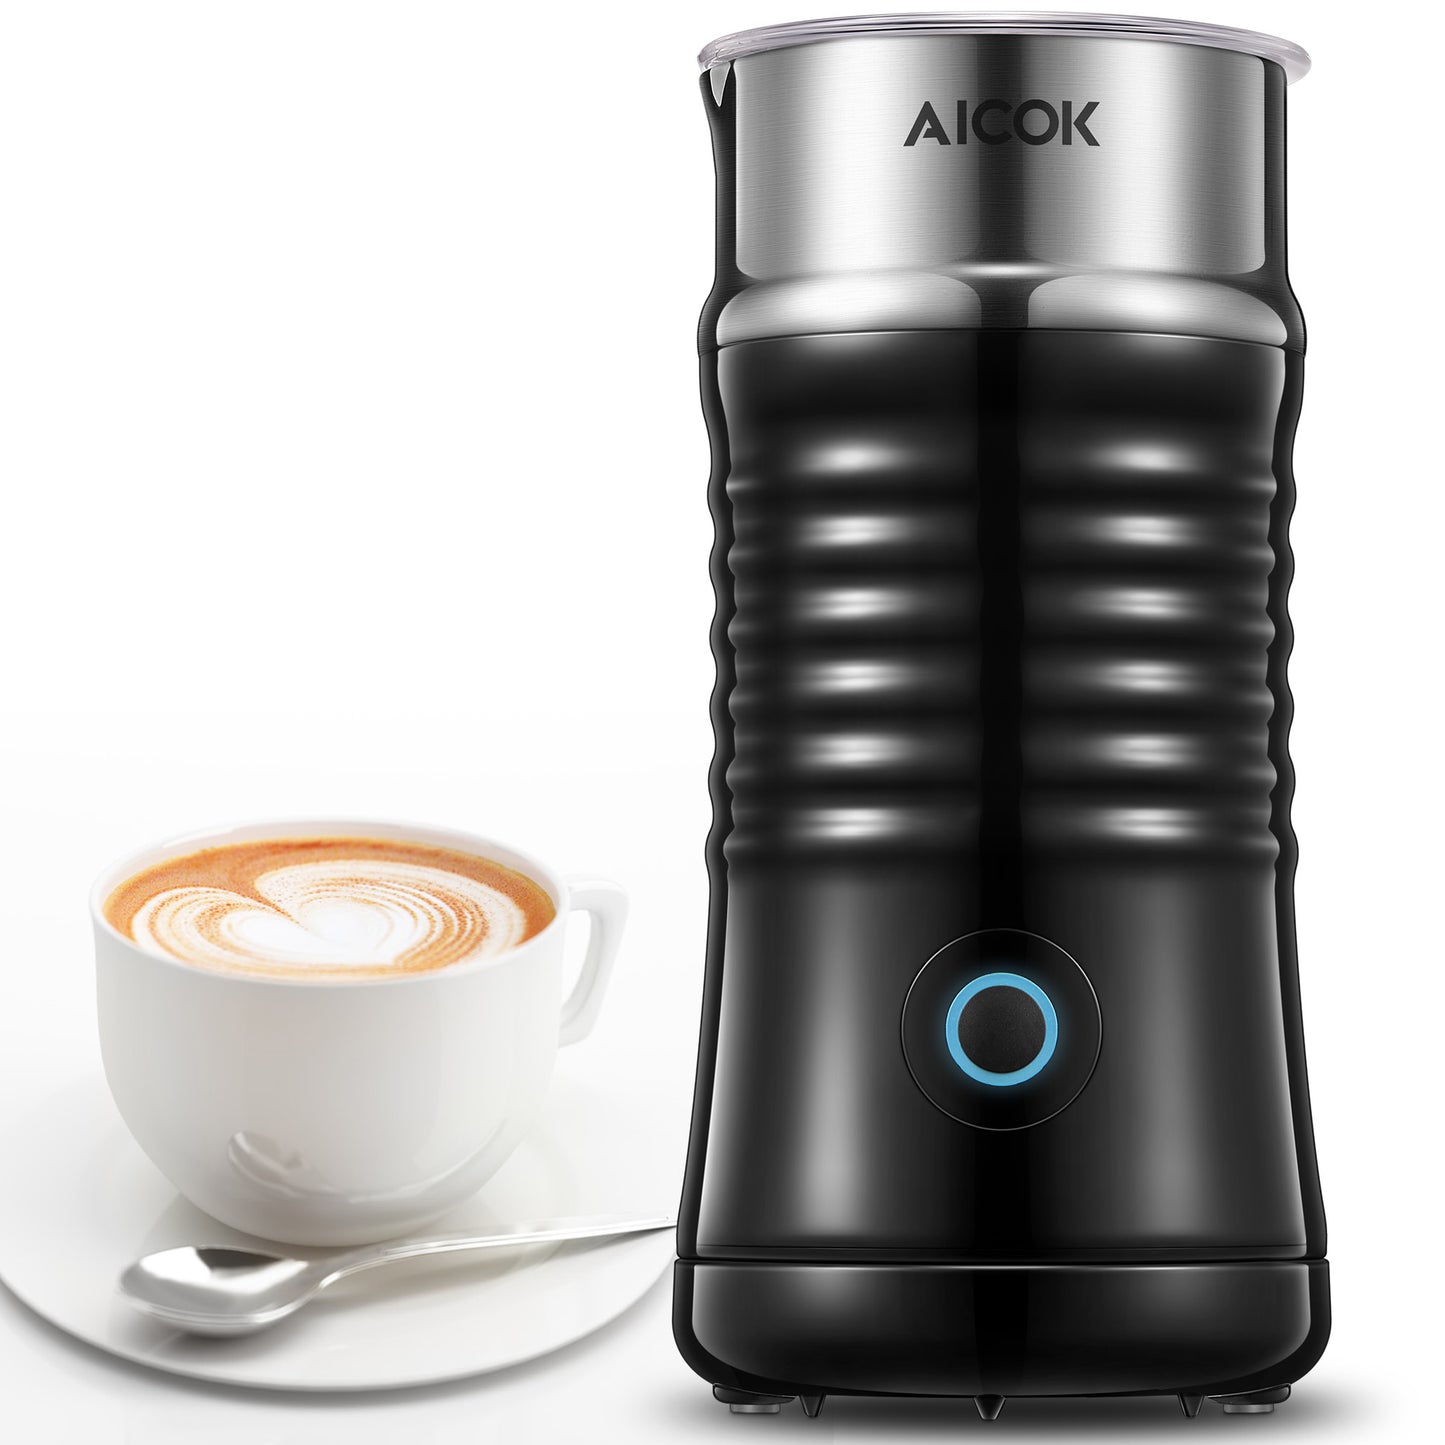 AICOK Milk Frother, 240ml Electric Milk Steamer for Making Latte, Cappuccino, Hot Chocolate in 1 min, Milk Frother Machine with Extra Whisks, 3 Modes Automatic Cold Hot Milk Frother & Warmer